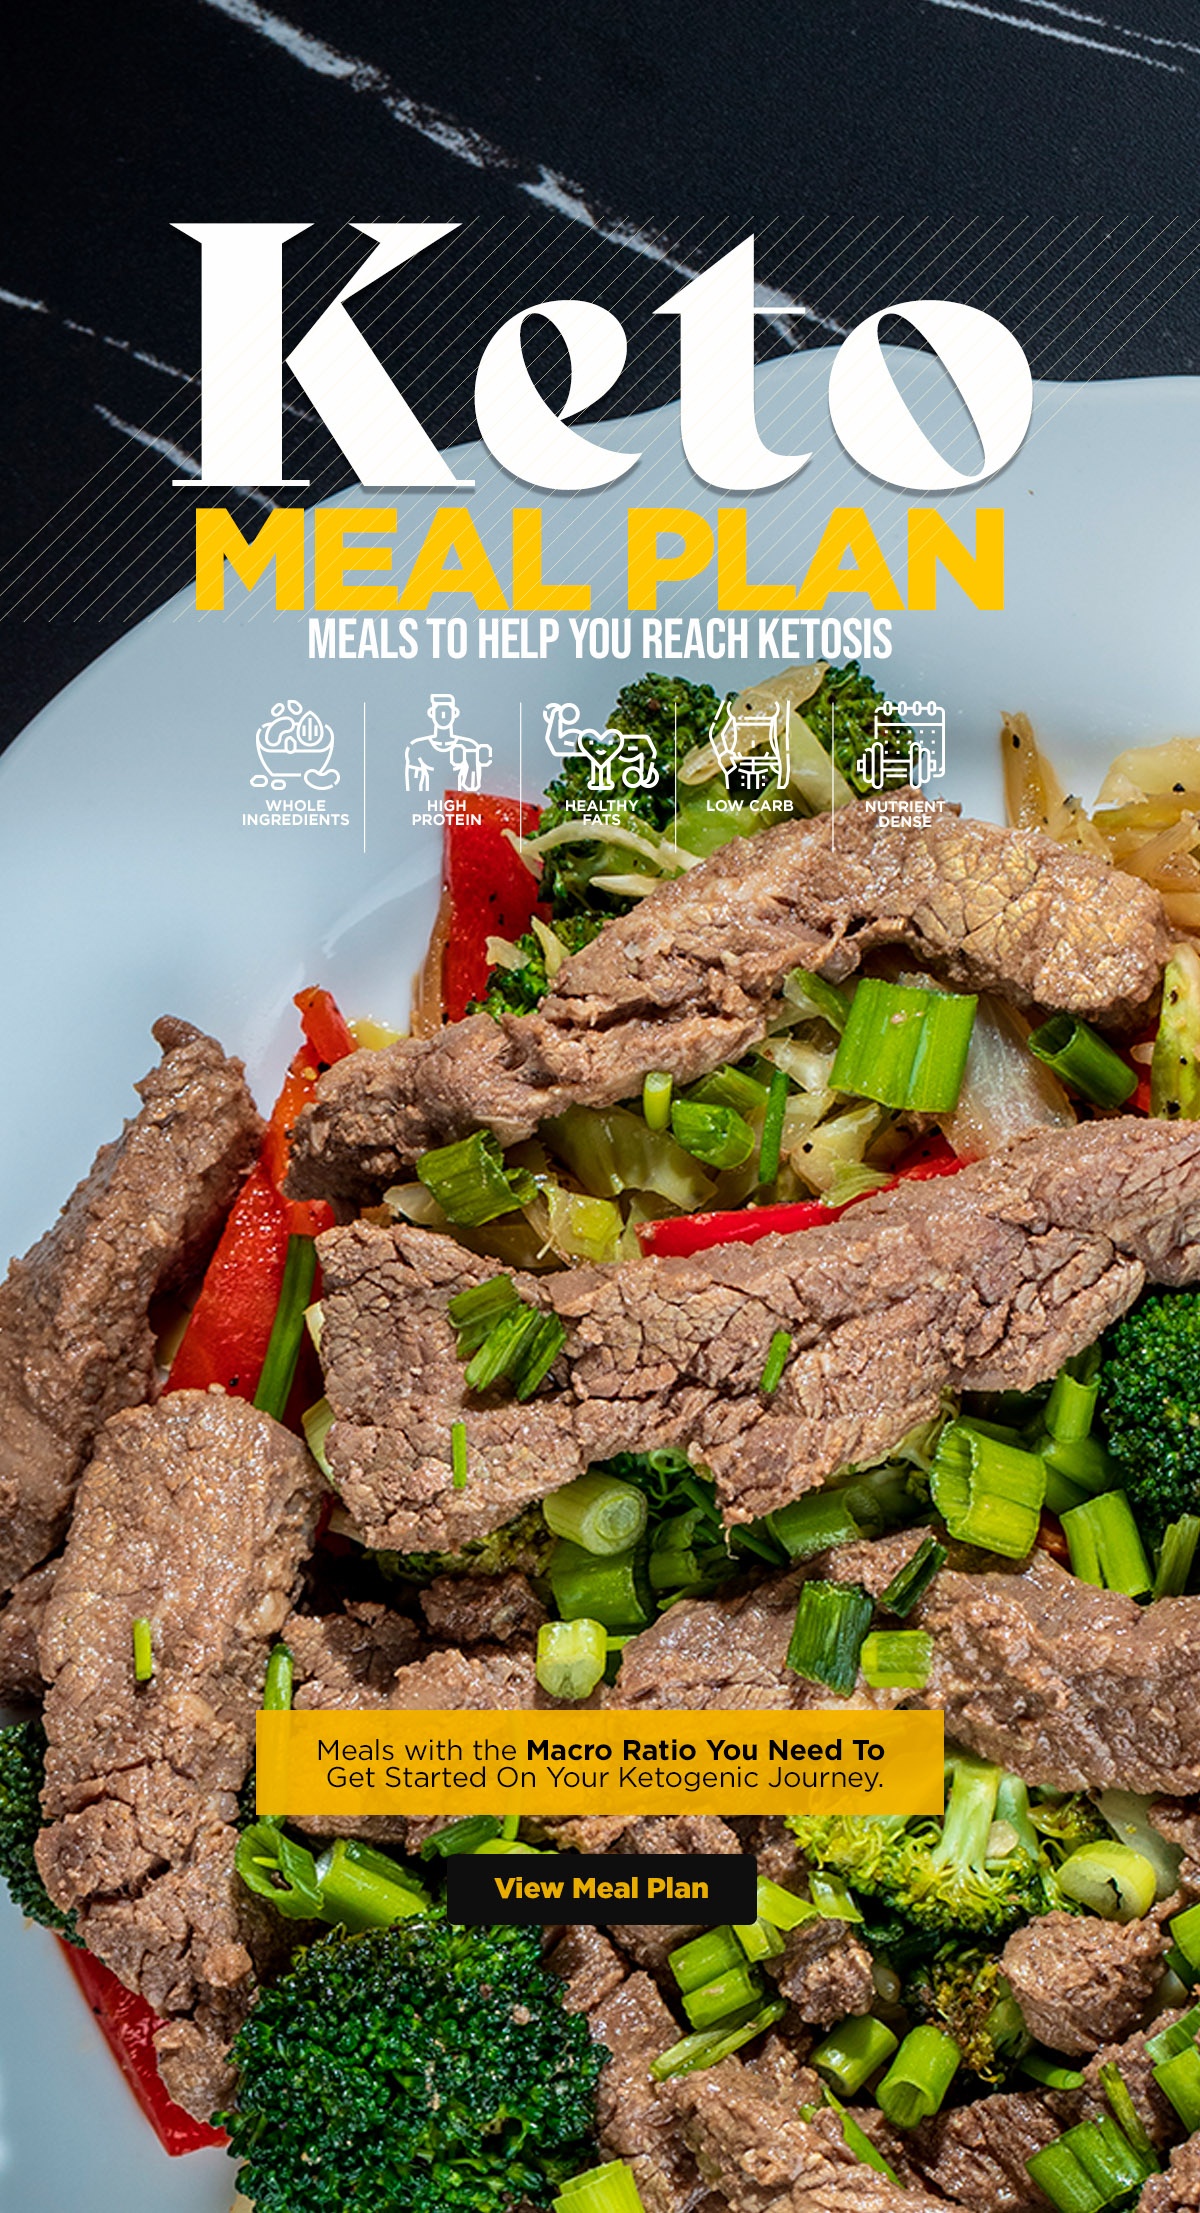 Keto Meal Plan - Meals To Help You Reach Ketosis.